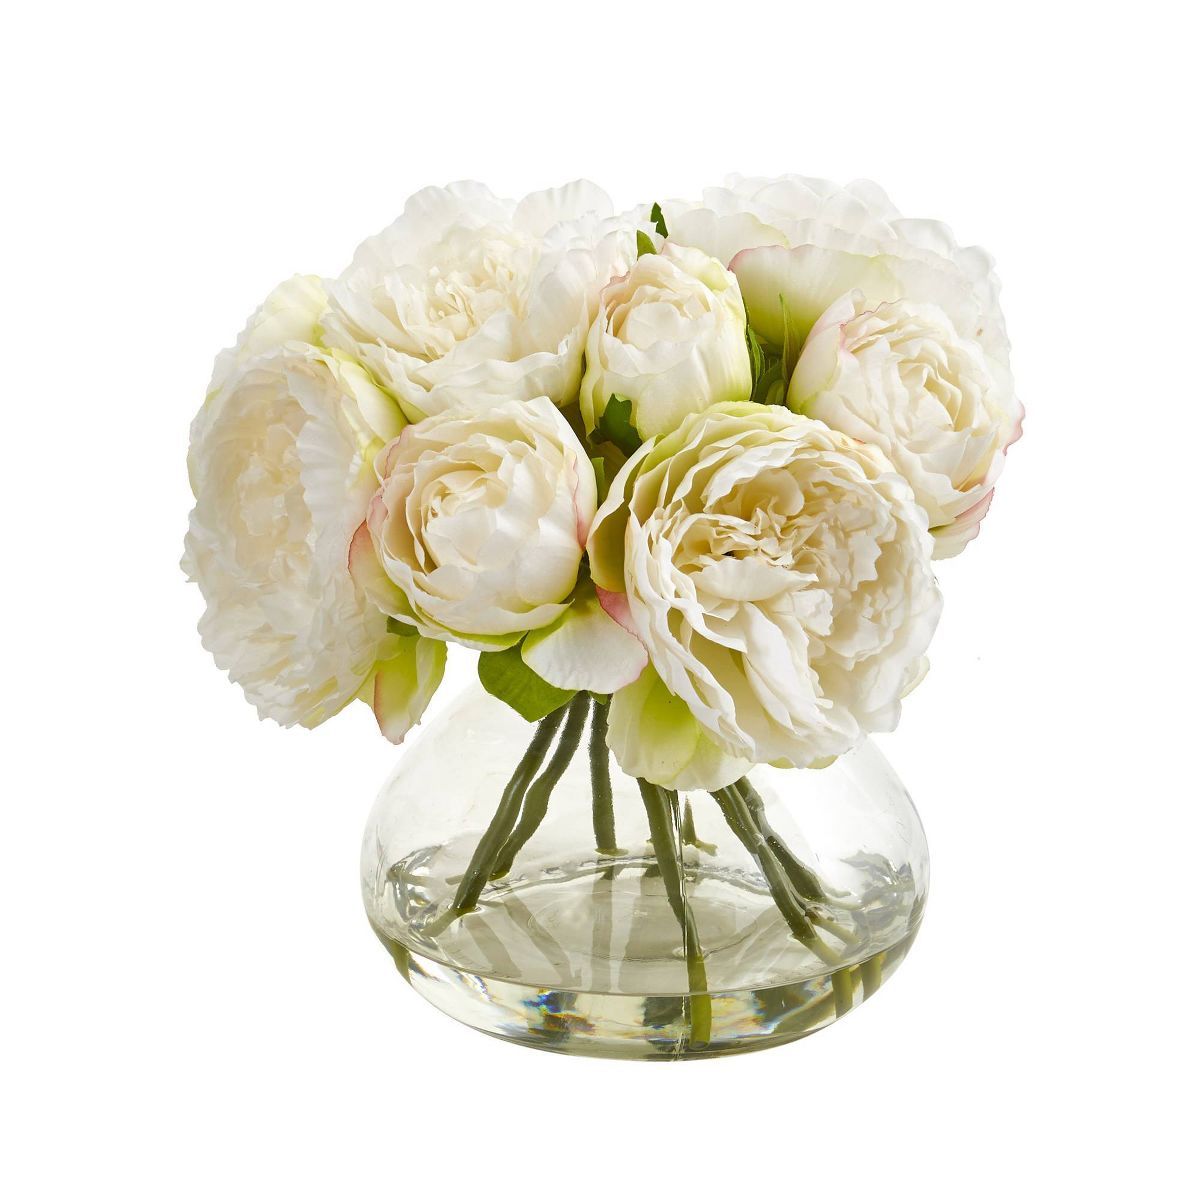 10" x 9" Artificial Peony Plant Arrangement in Vase - Nearly Natural | Target